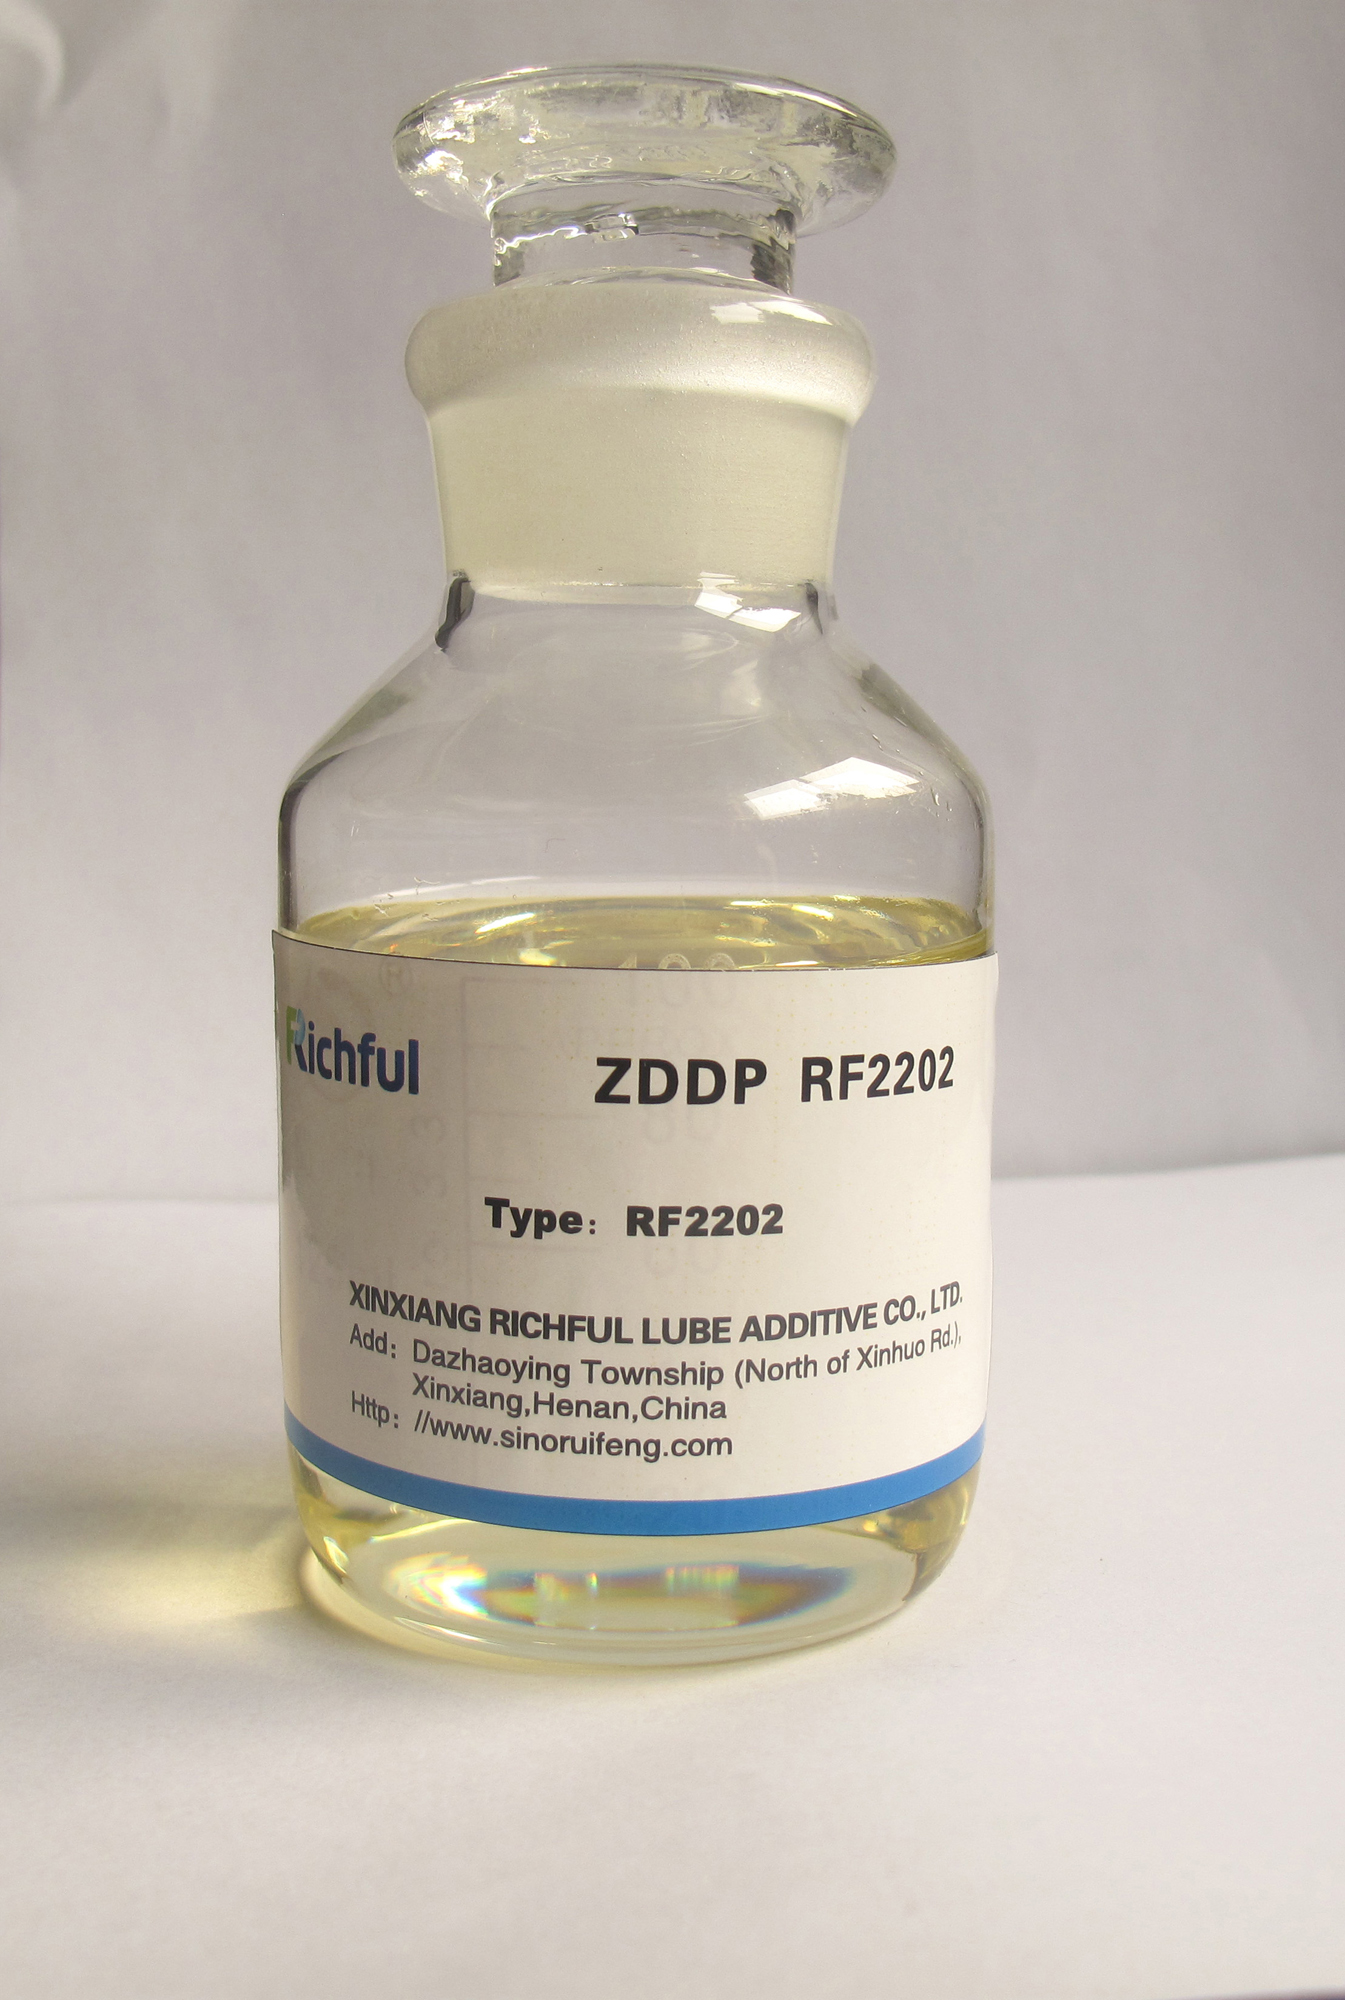 ZDDP Richful Lubricant Additives Antioxidant and Corrosion Inhibitor Zinc Butyl Octyl Primary Alkyl Dithiophosphate RF2202